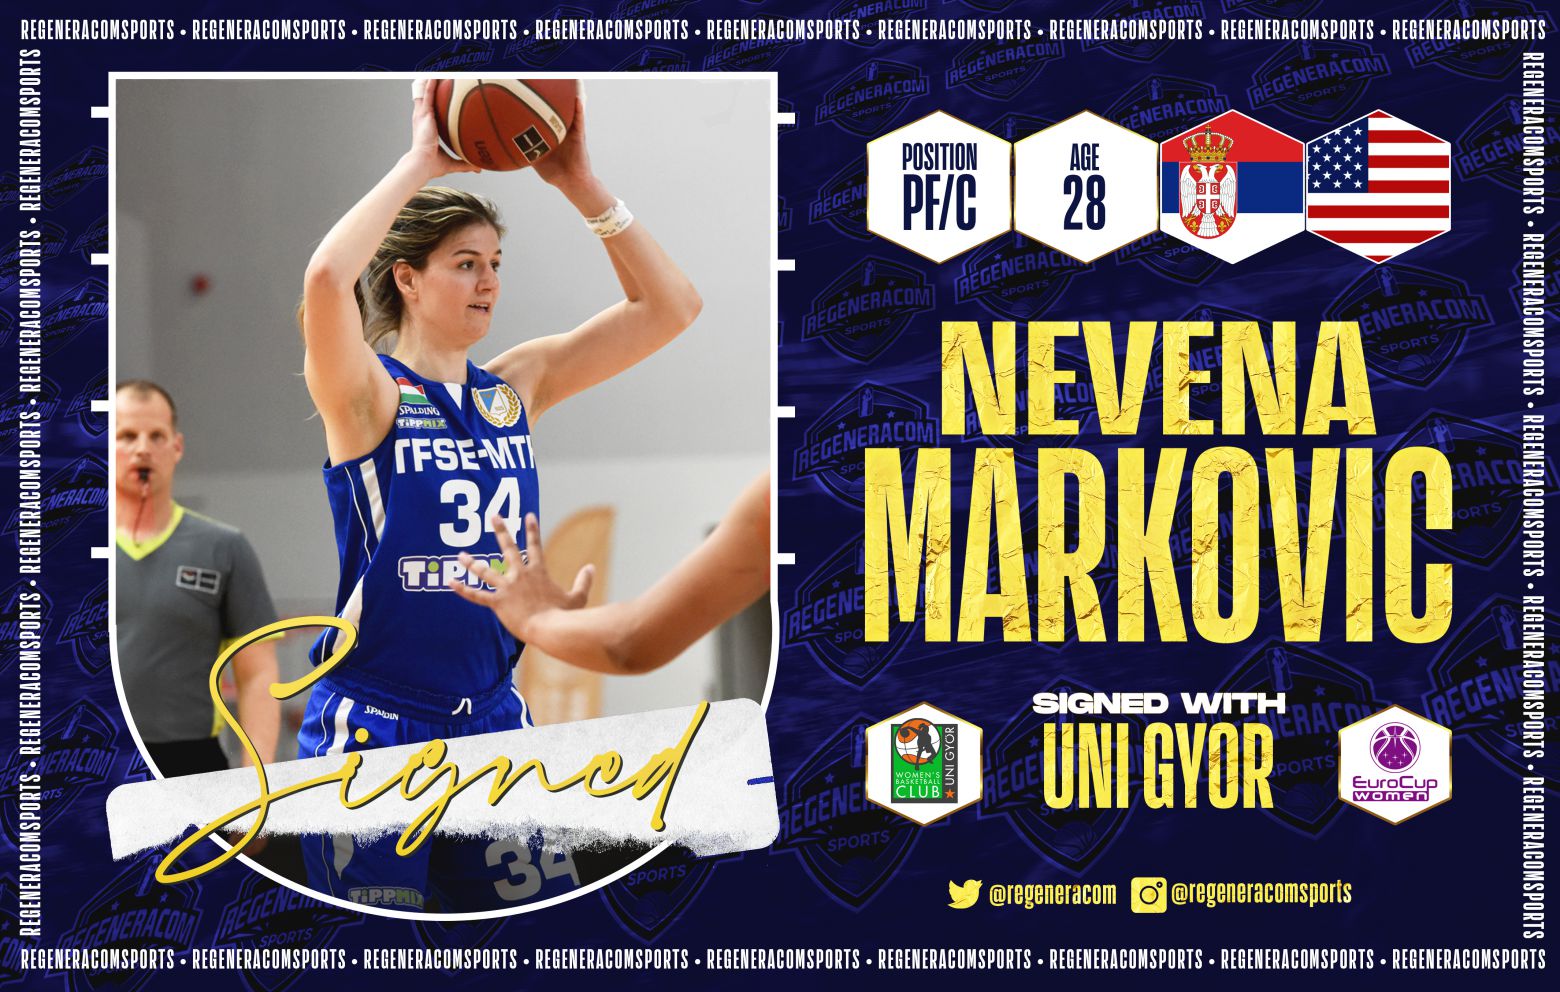 NEVENA MARKOVIC has signed in Hungary with Uni Györ for the 2021/22 season